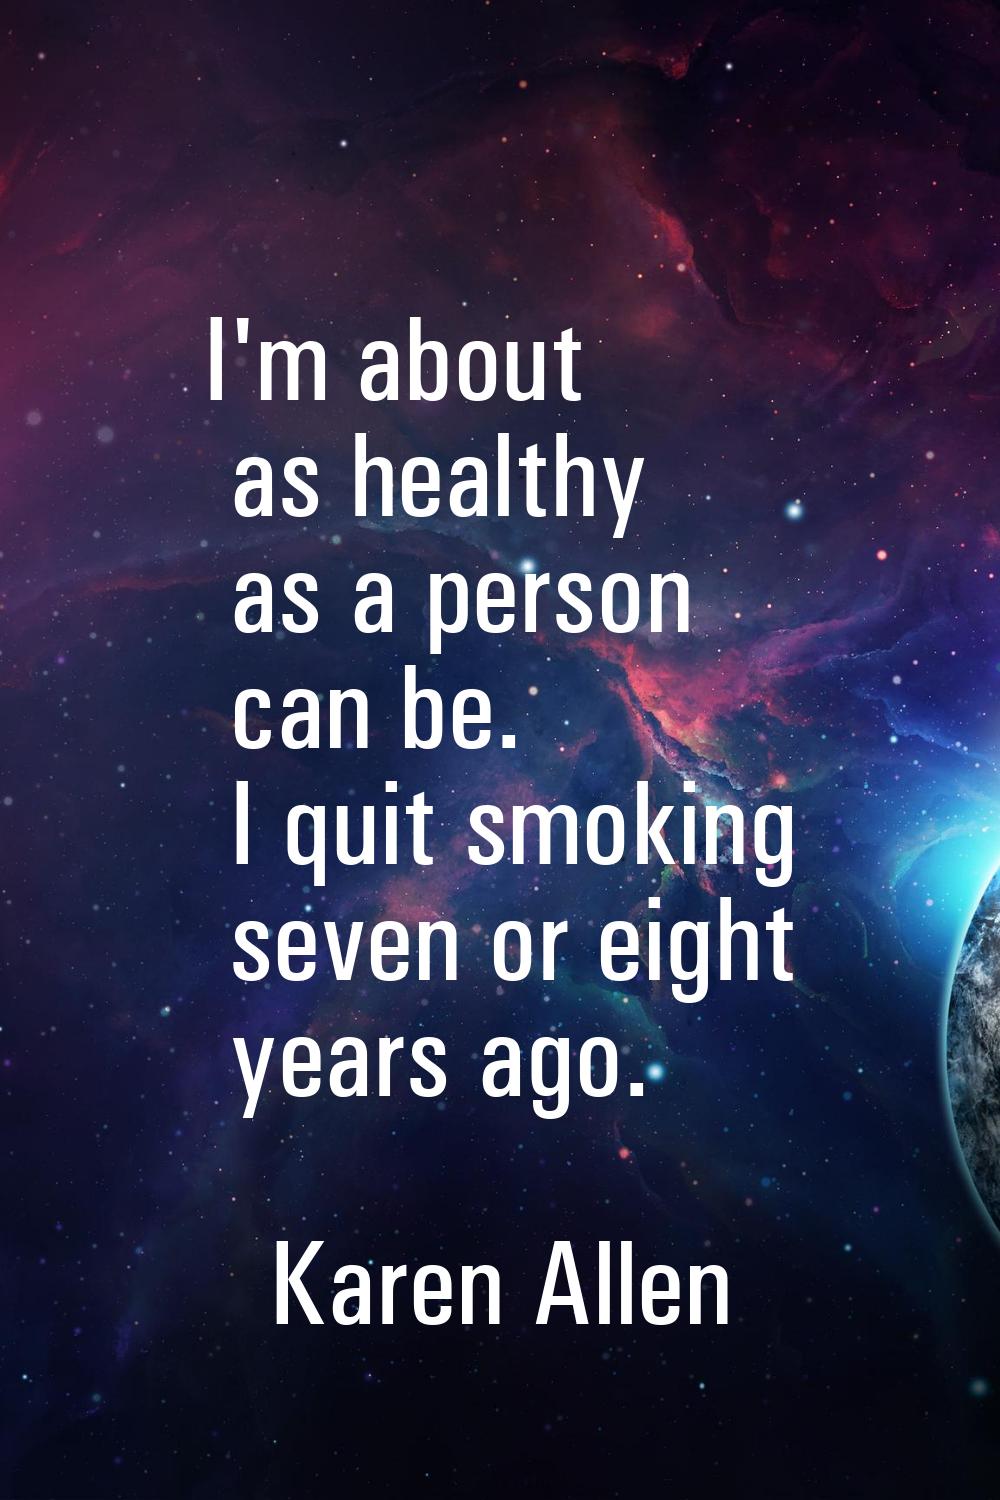 I'm about as healthy as a person can be. I quit smoking seven or eight years ago.